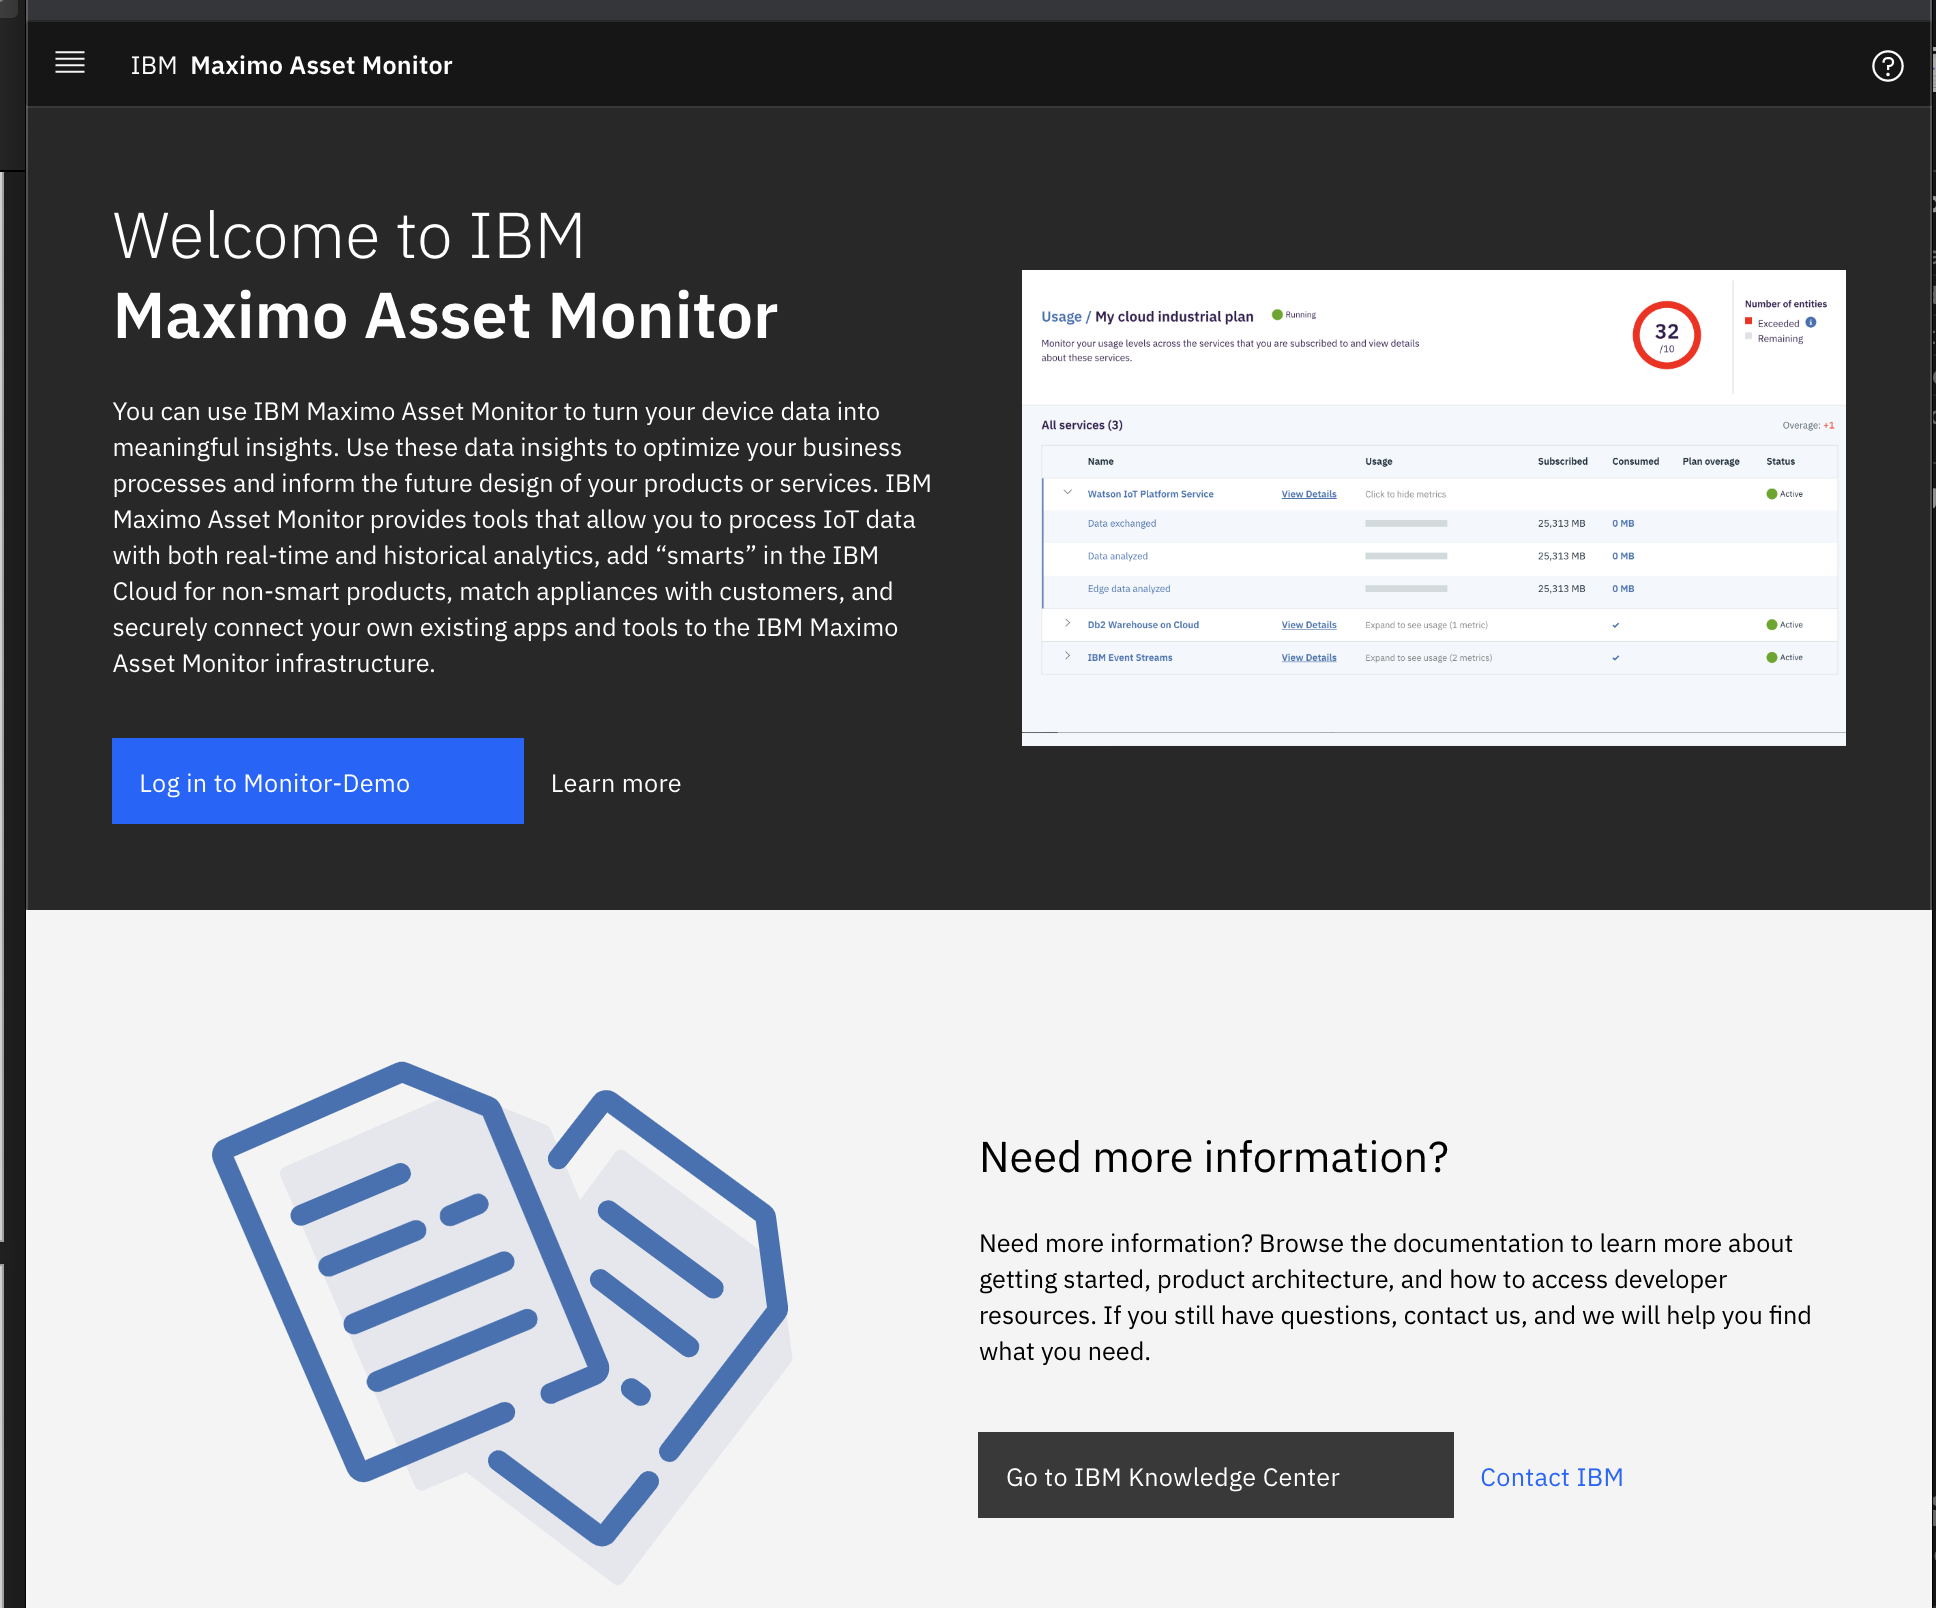 Login to Maximo Asset Monitor